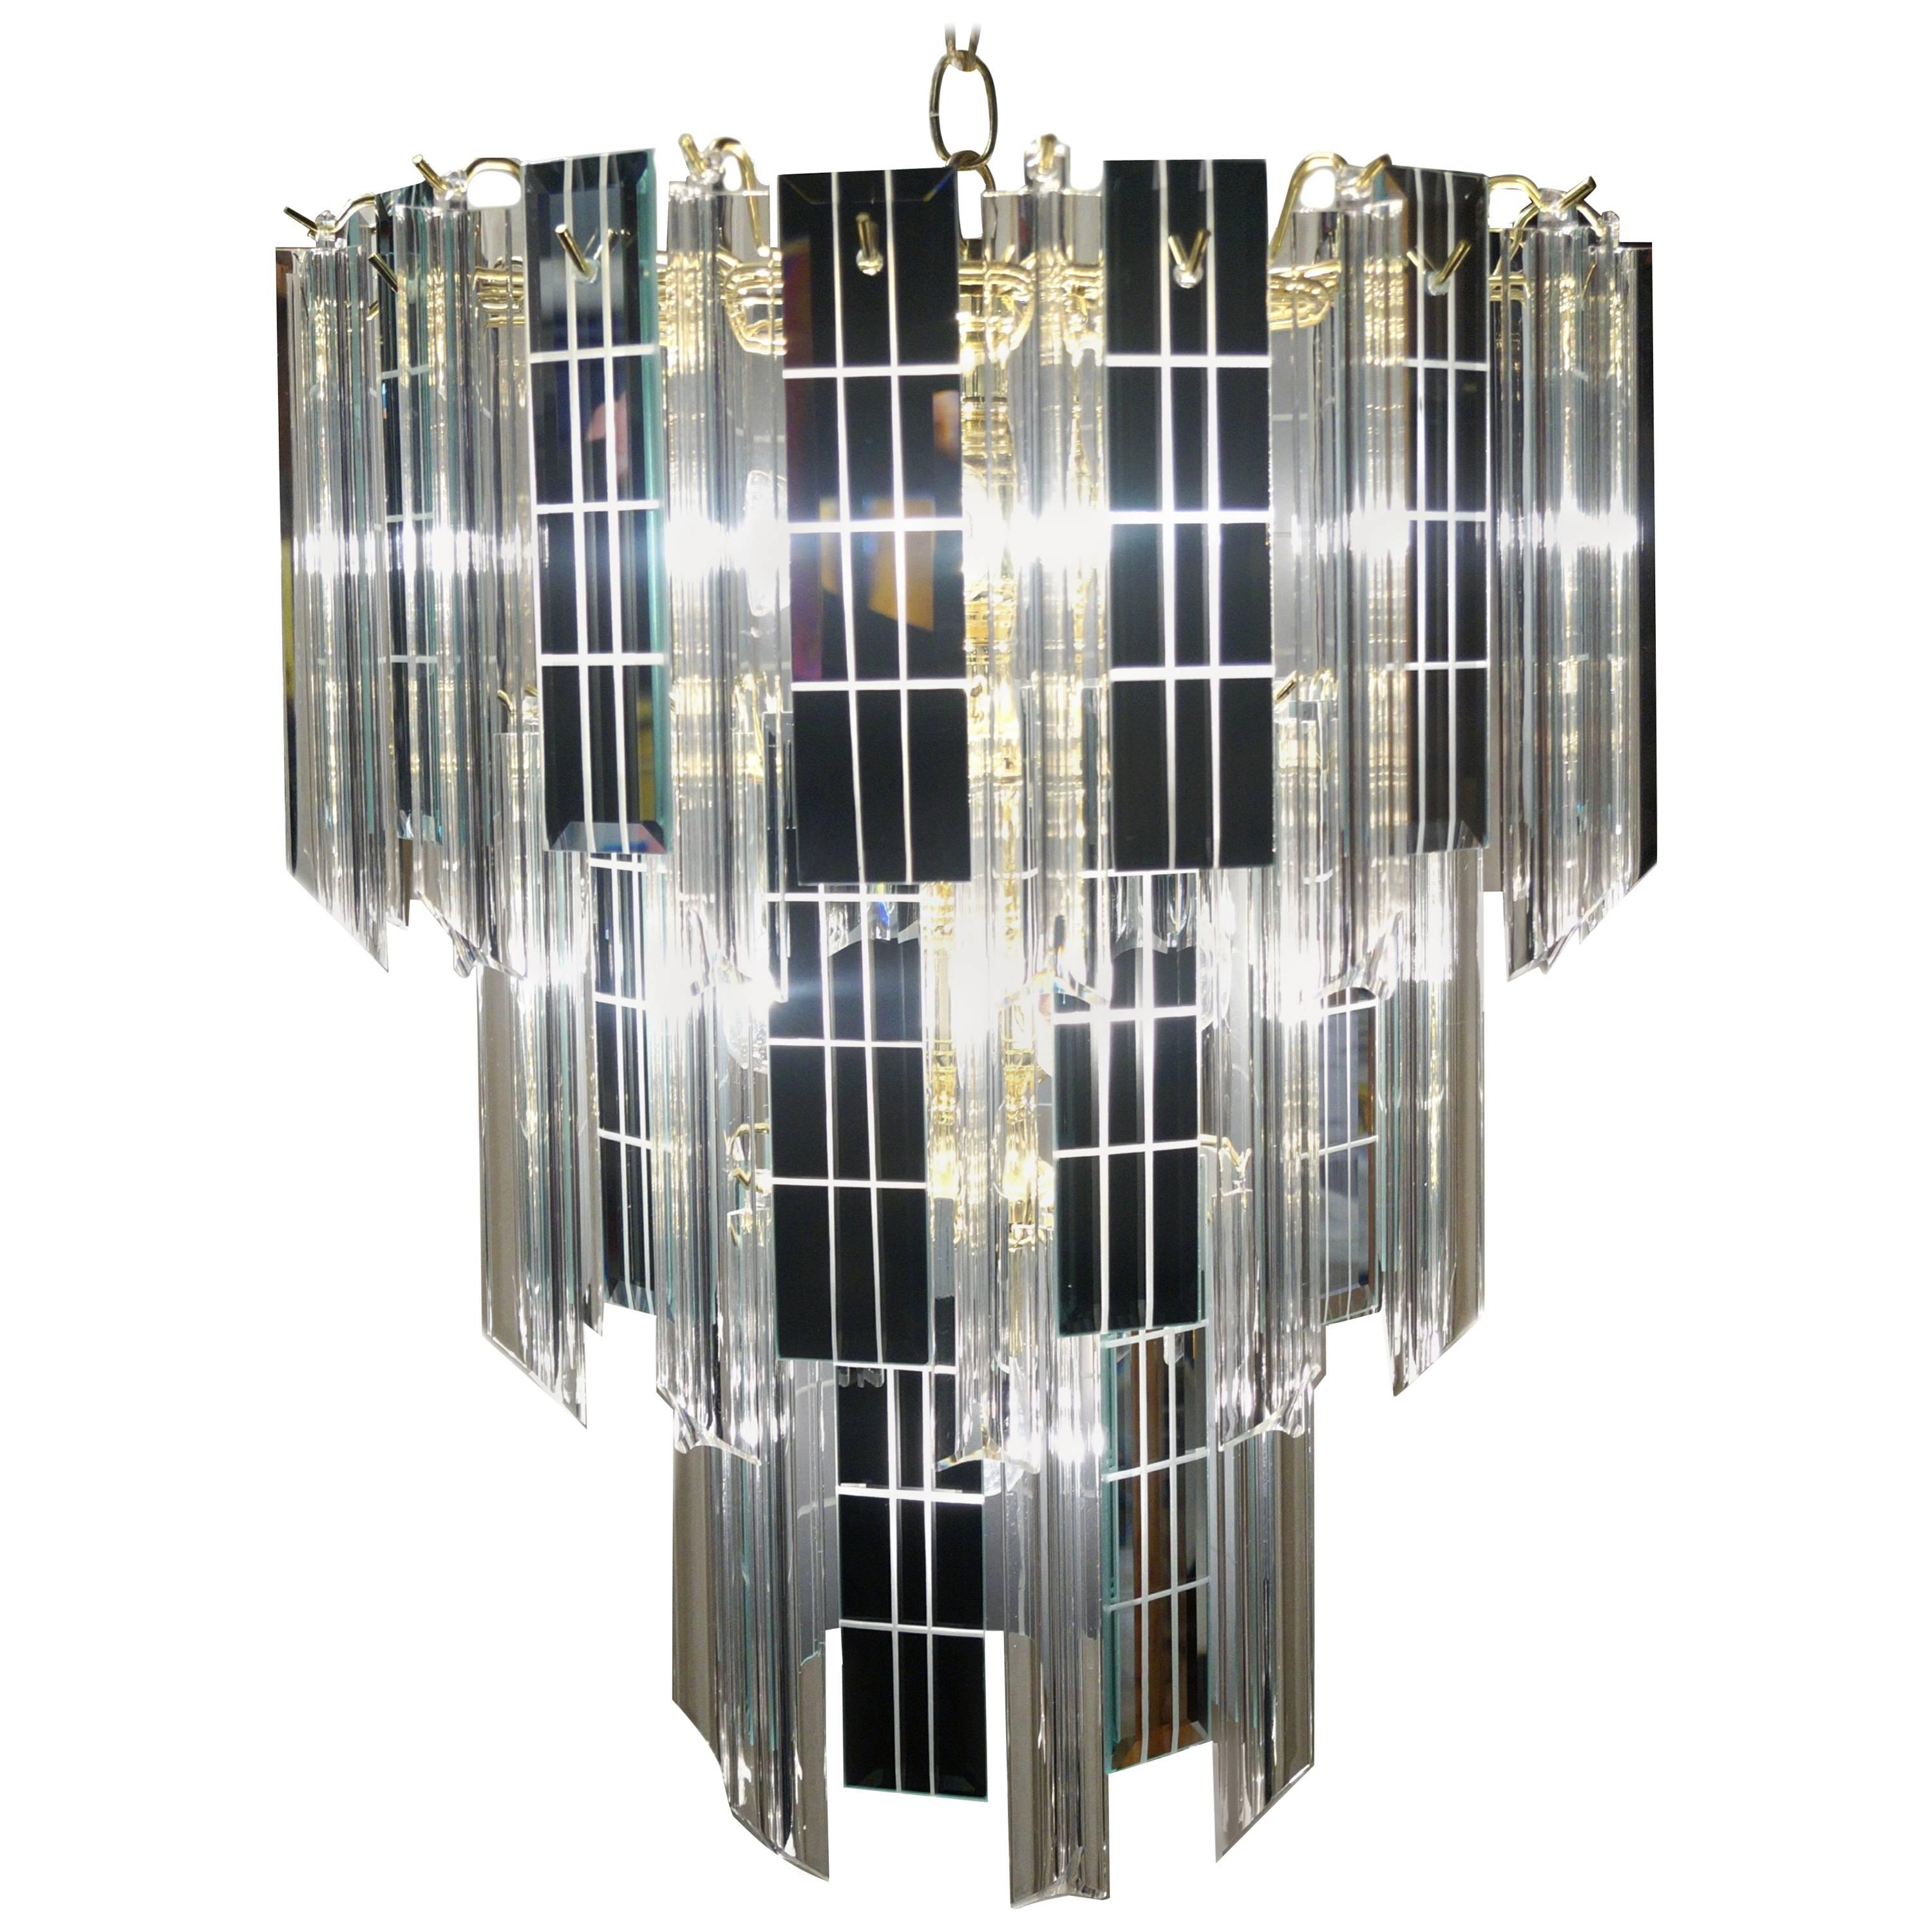 Mid-Century Modern Three-Tier Lucite and Mirror Mirrored Pendant Lamp Chandelier For Sale